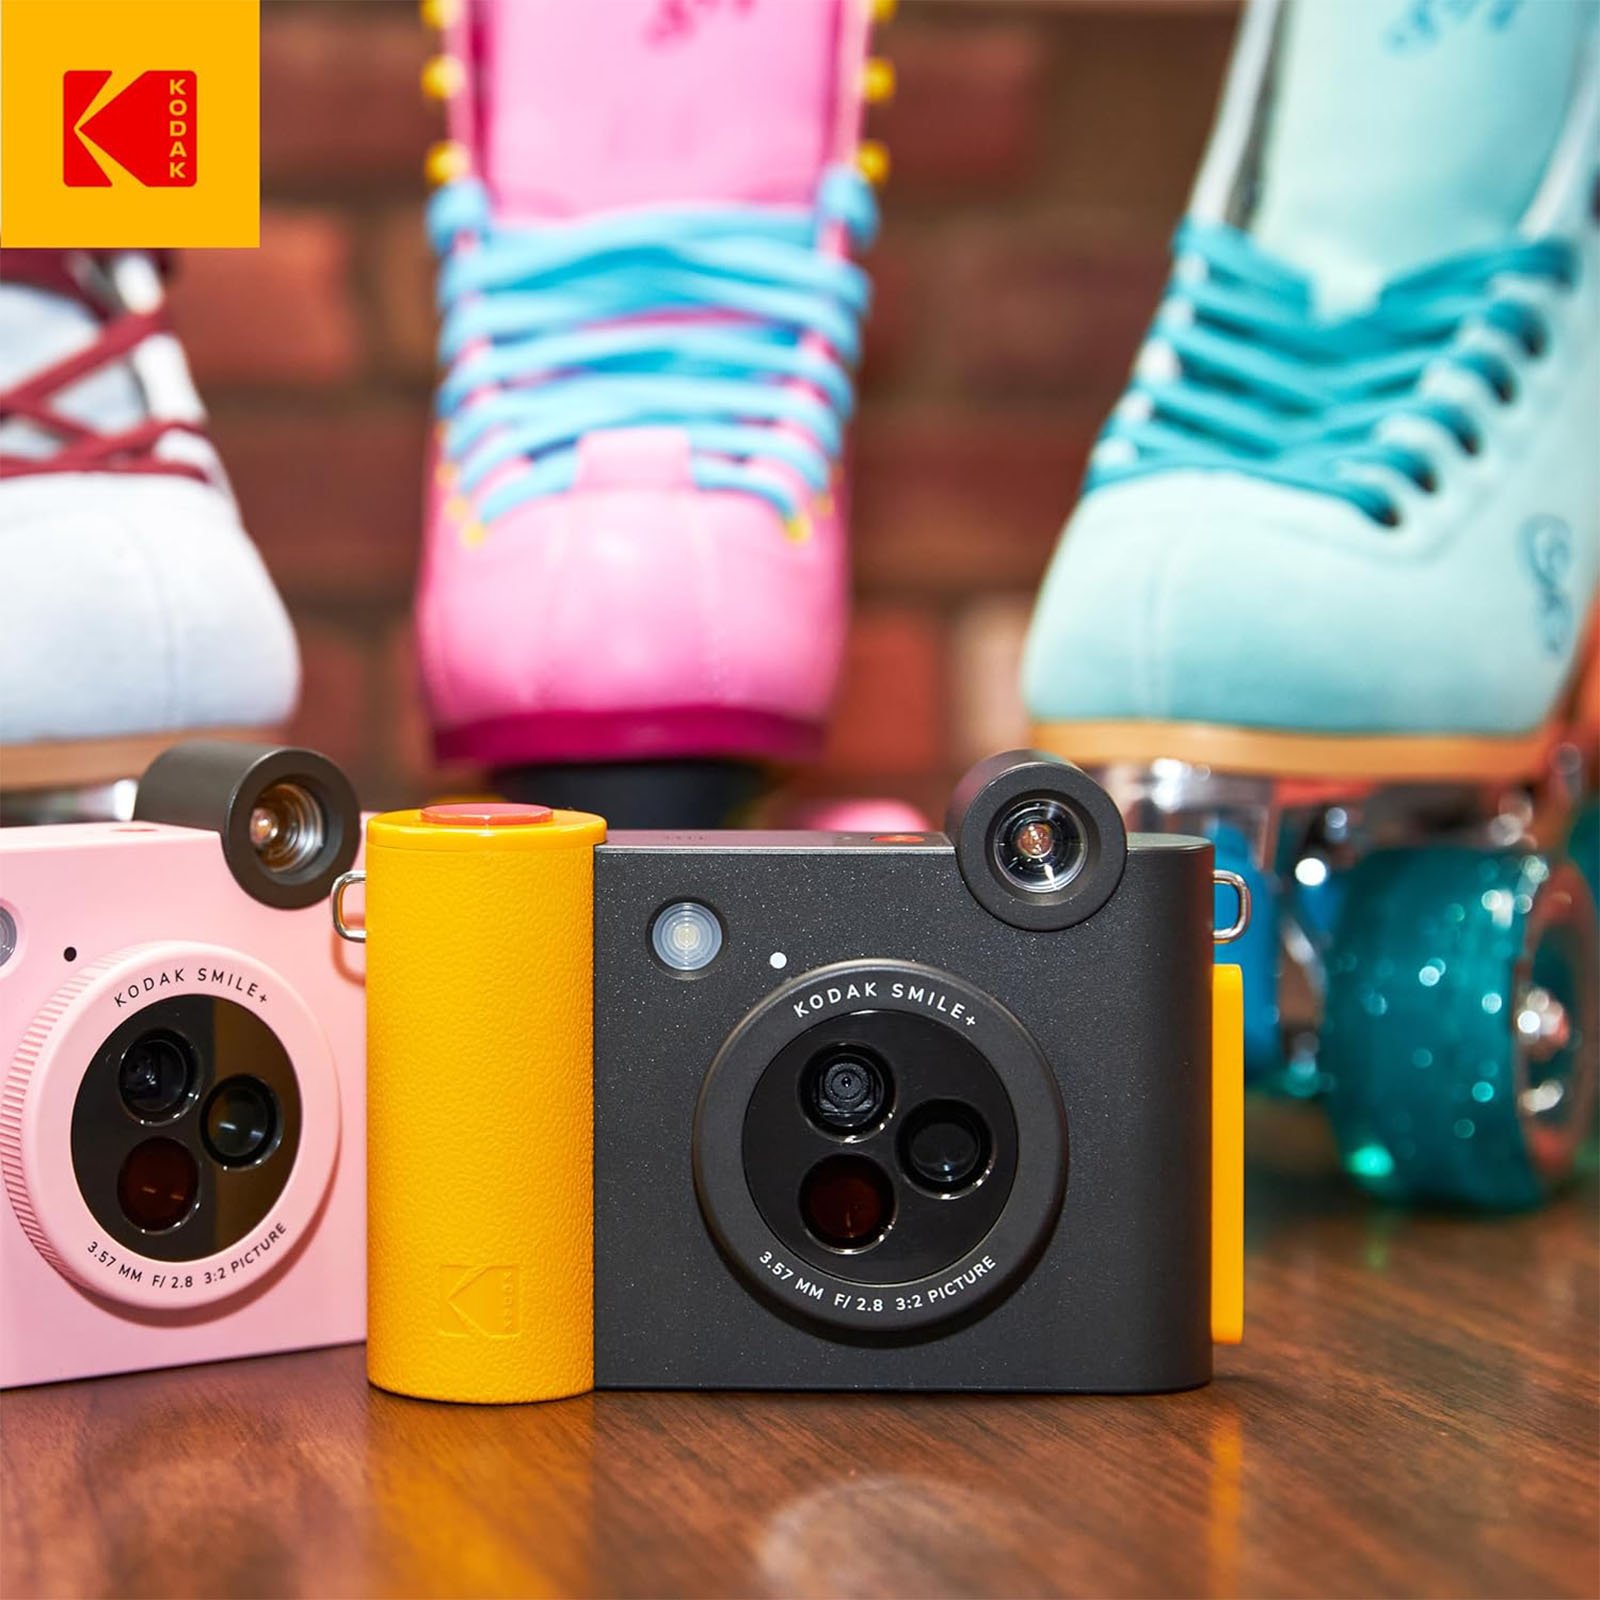 Three colorful Kodak Smile instant print cameras in pink, yellow, and blue, displayed on a table with patterned roller skates and teal mugs in the background.